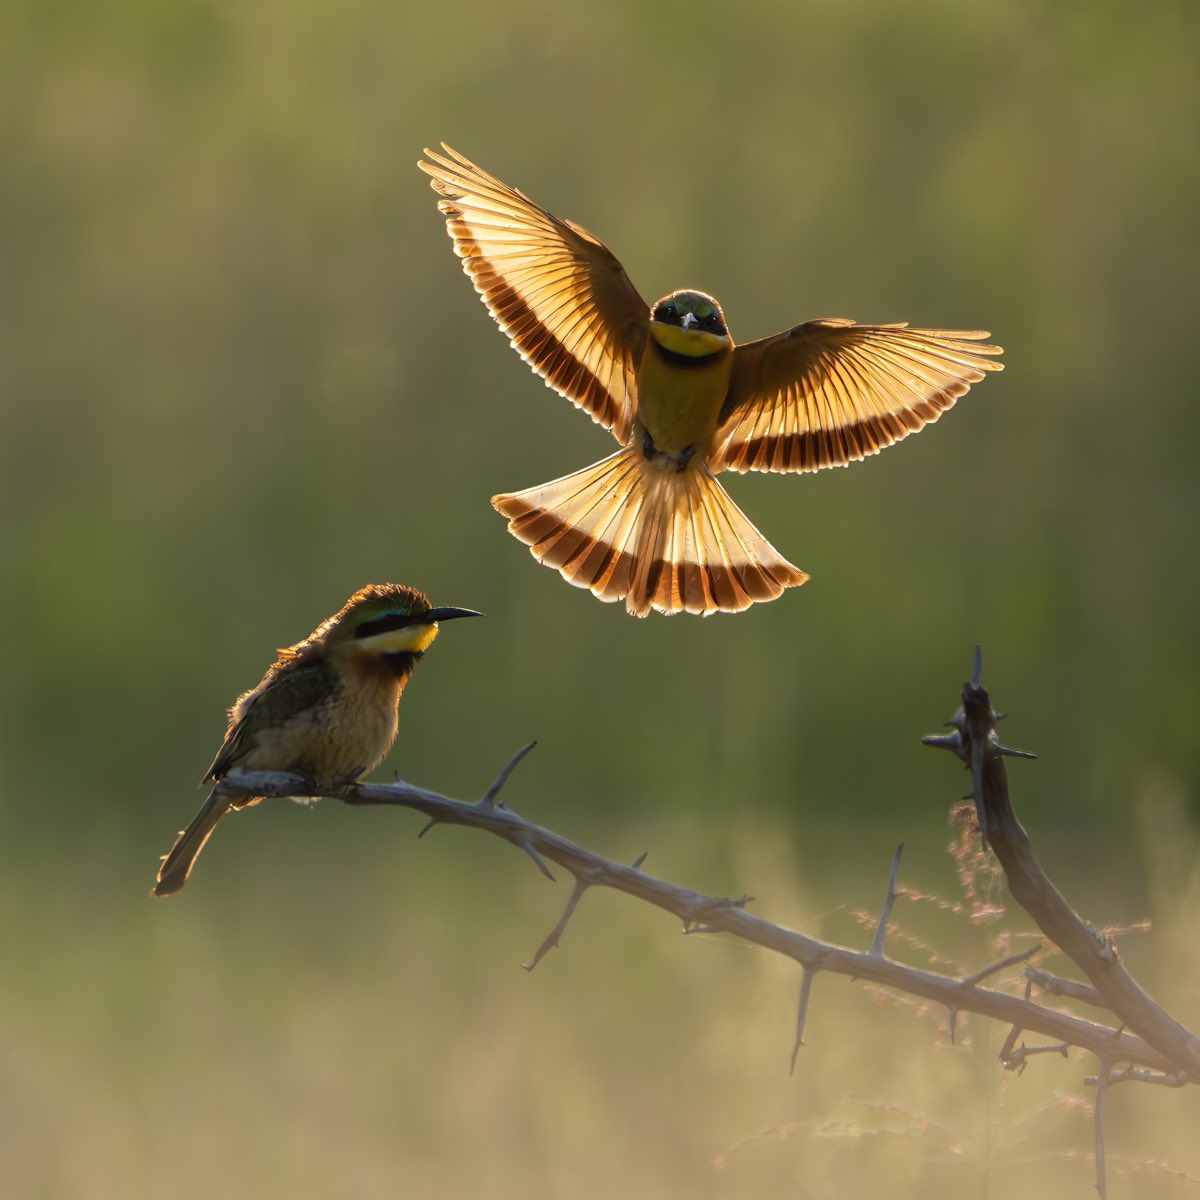 Winners of the PDI members choice competition 1st 🥇 Straight To The Point by @RyanbaileyP Joint 2nd European Hare by @hedleywright & Little Bee-eater by Bruce Liggitt @AP_Magazine @CambCClub @StIvesPhotoClub #nature #wildlife #StillLife #pen #birding #birds @SpottedInEly